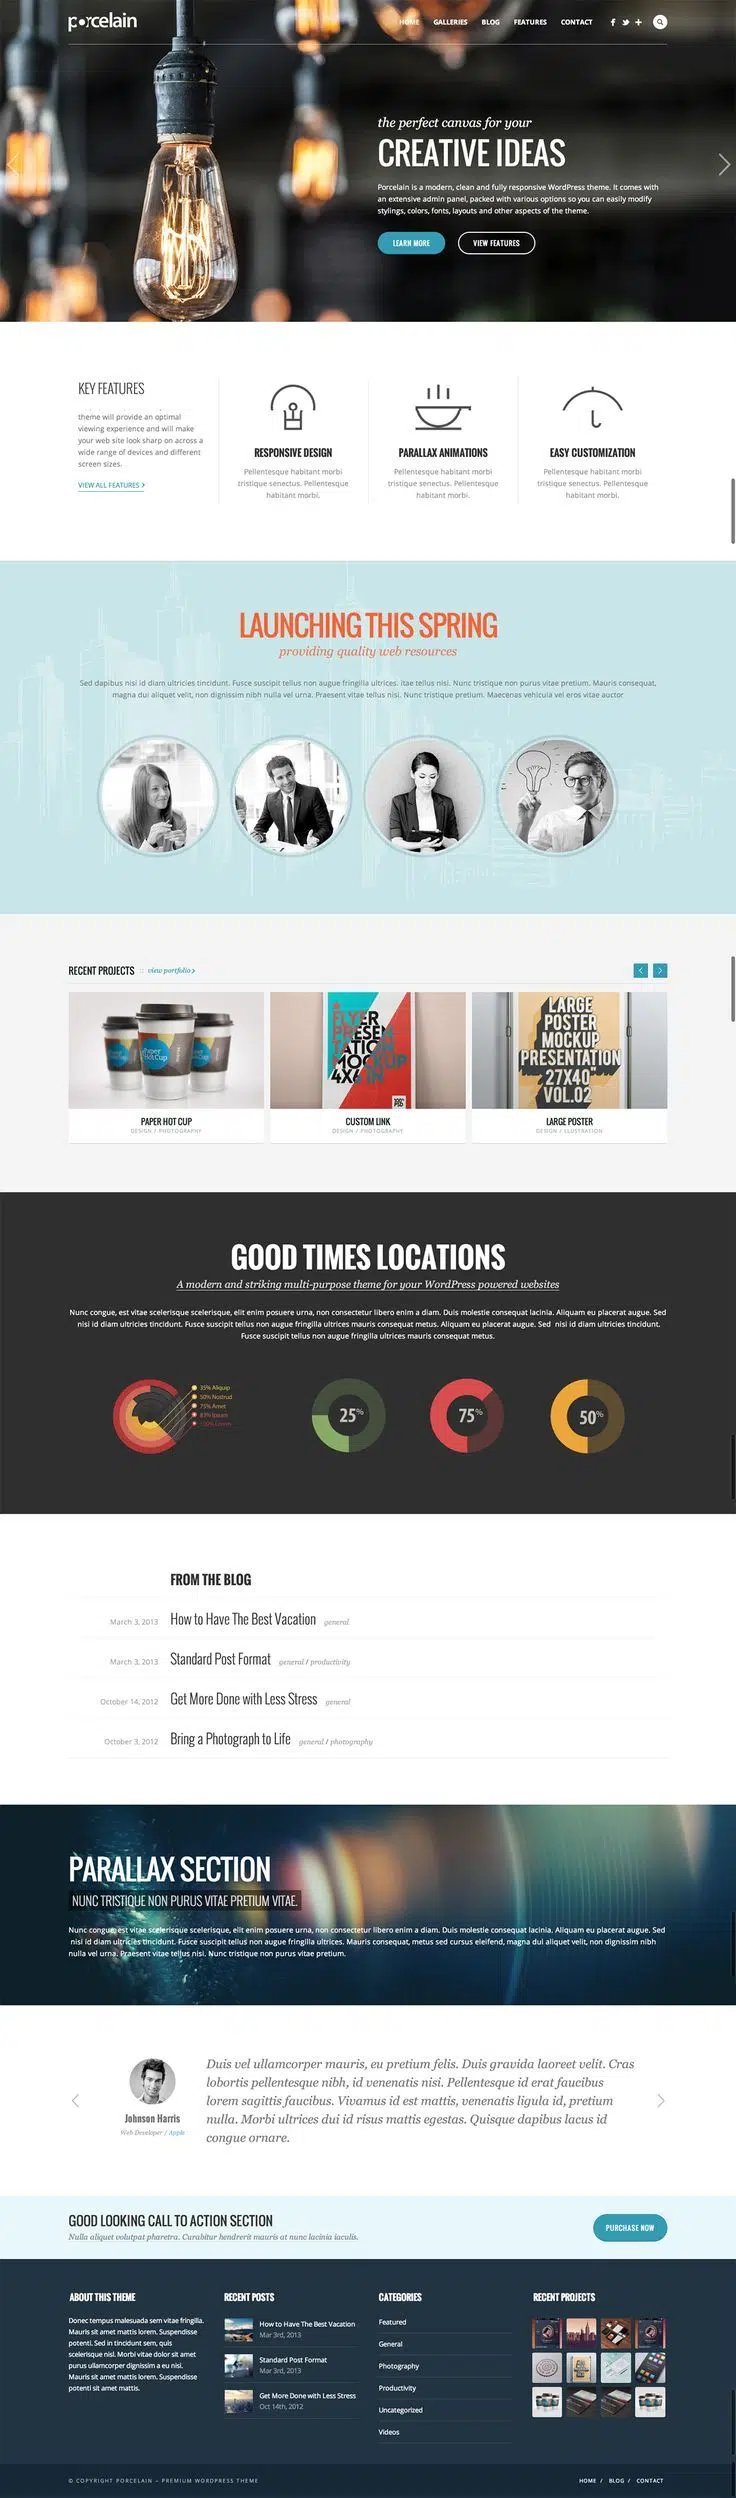 The Most CreAtive Professional WordPress Designs Released in October 2013 www.wo...